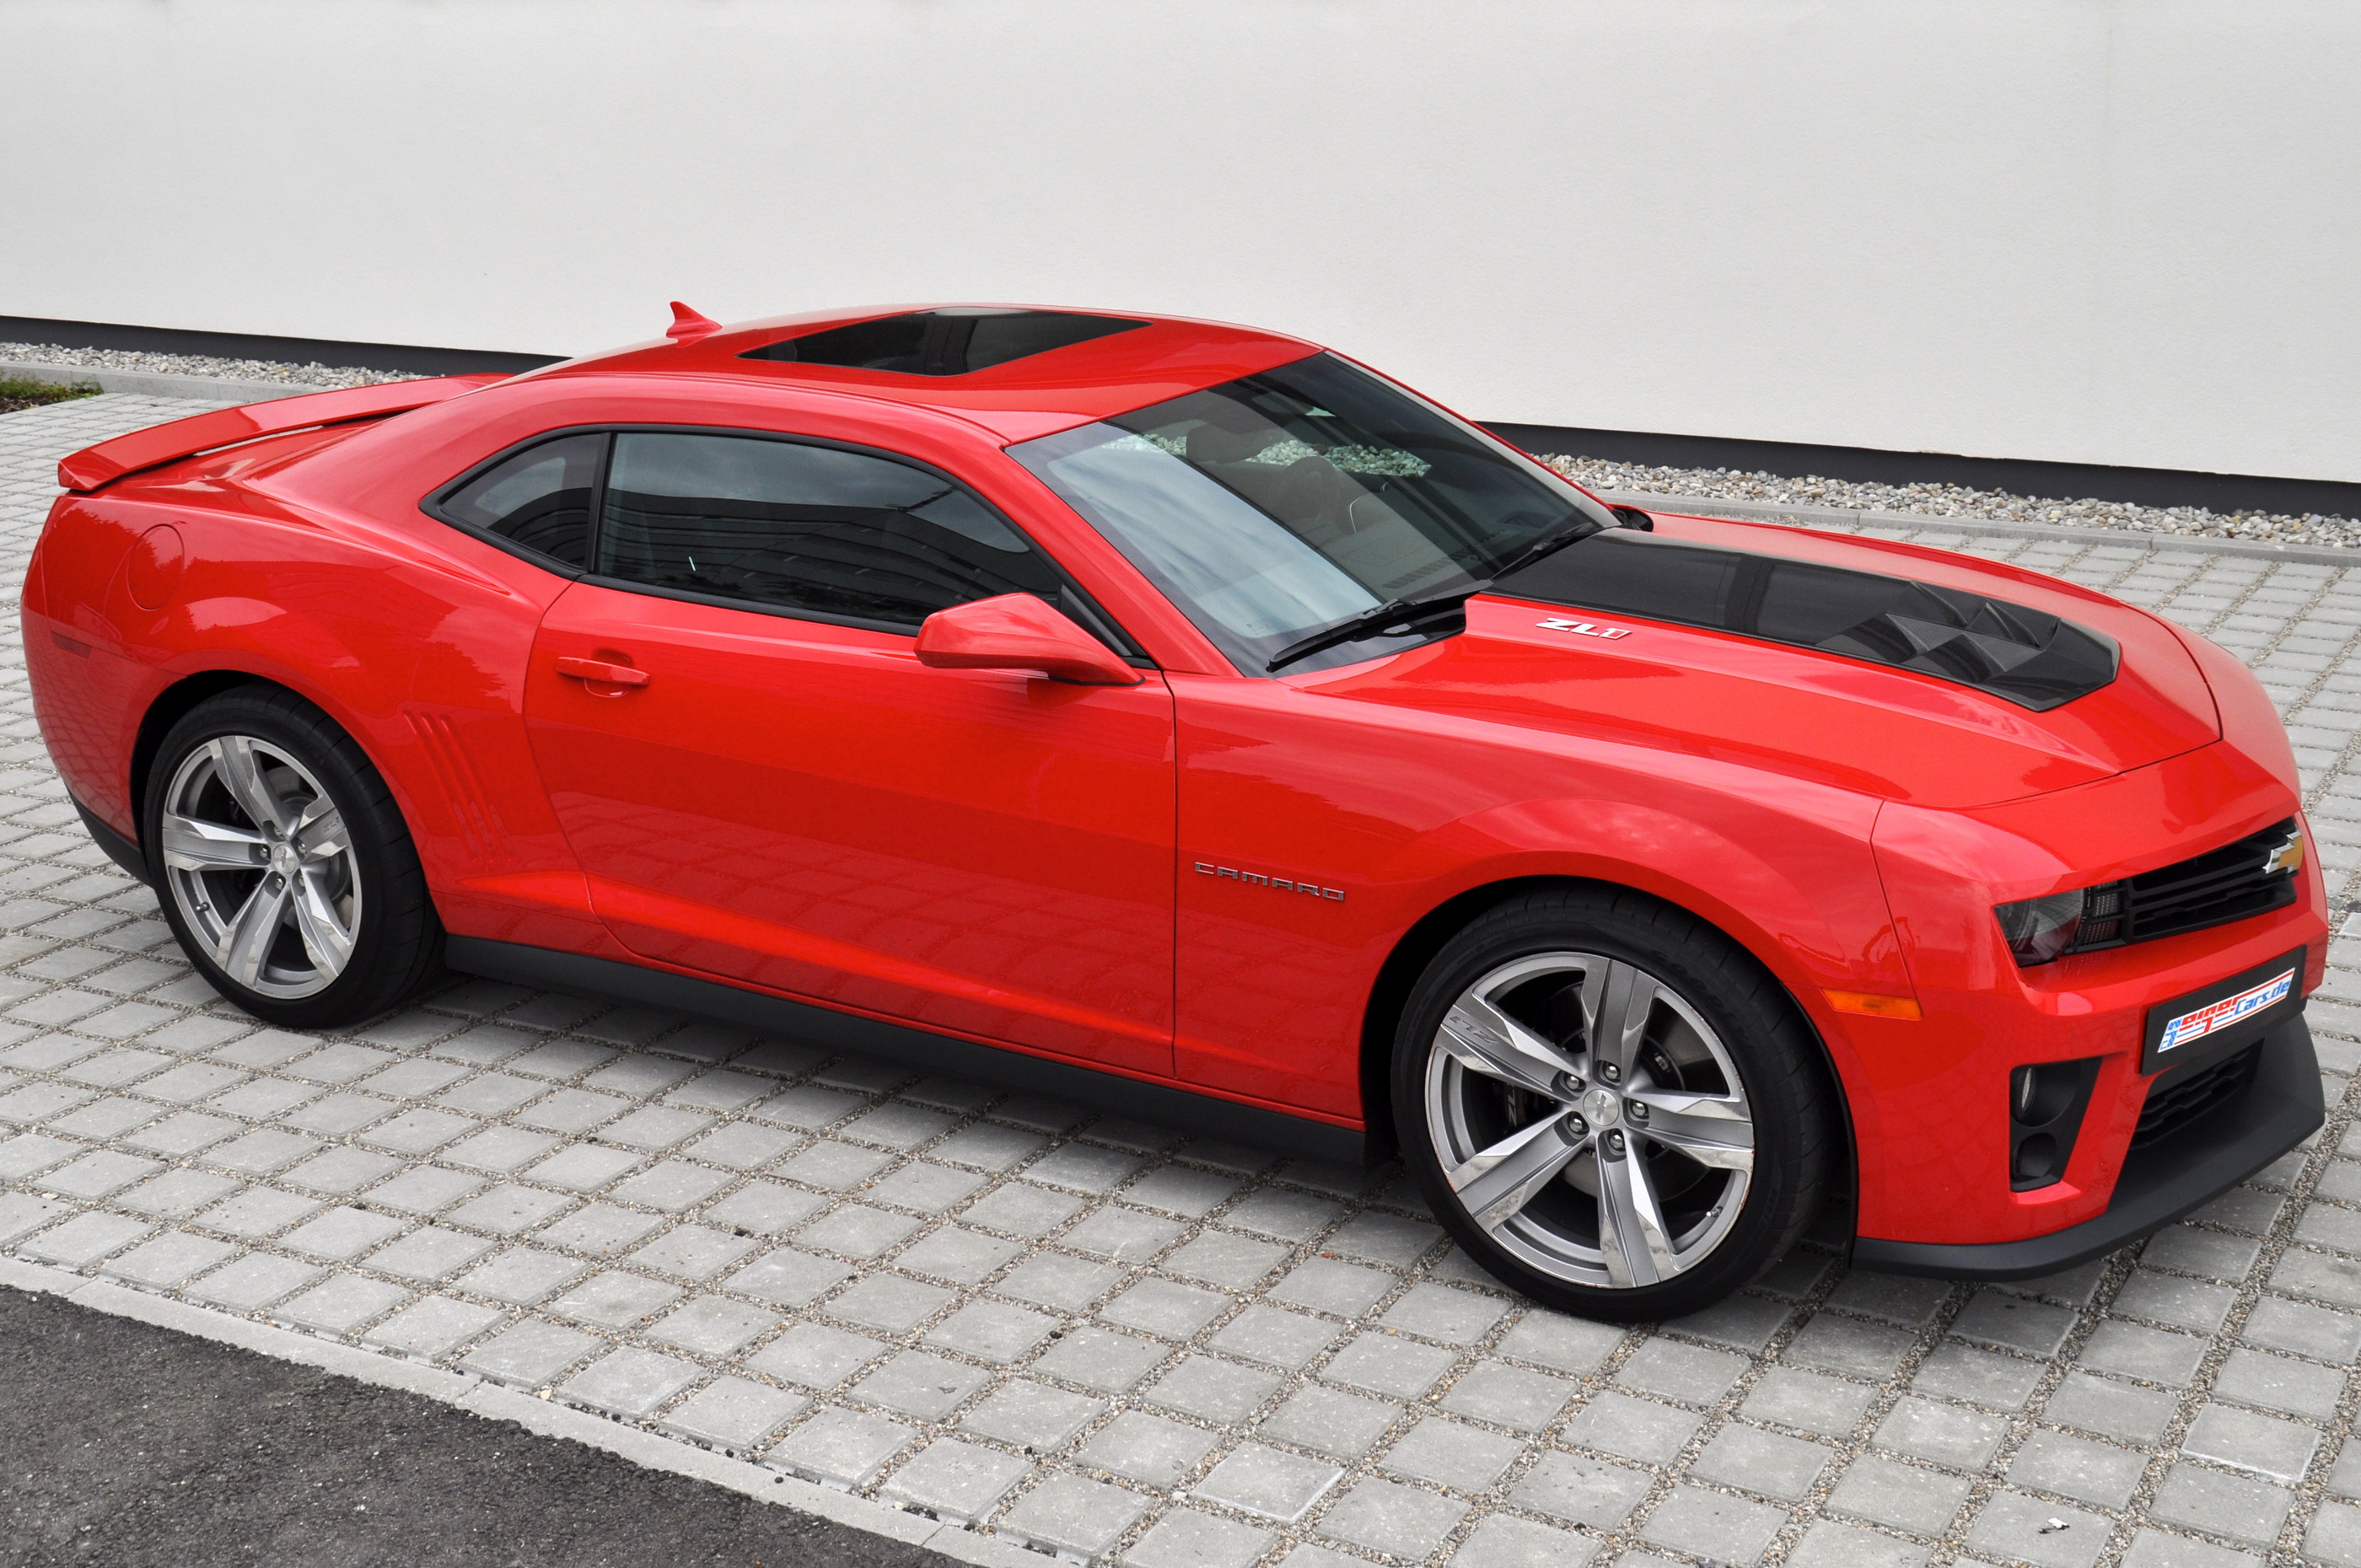 Image Tuning Chevrolet 2012 Camaro ZL1 (Geiger Cars) Red 2800x1860